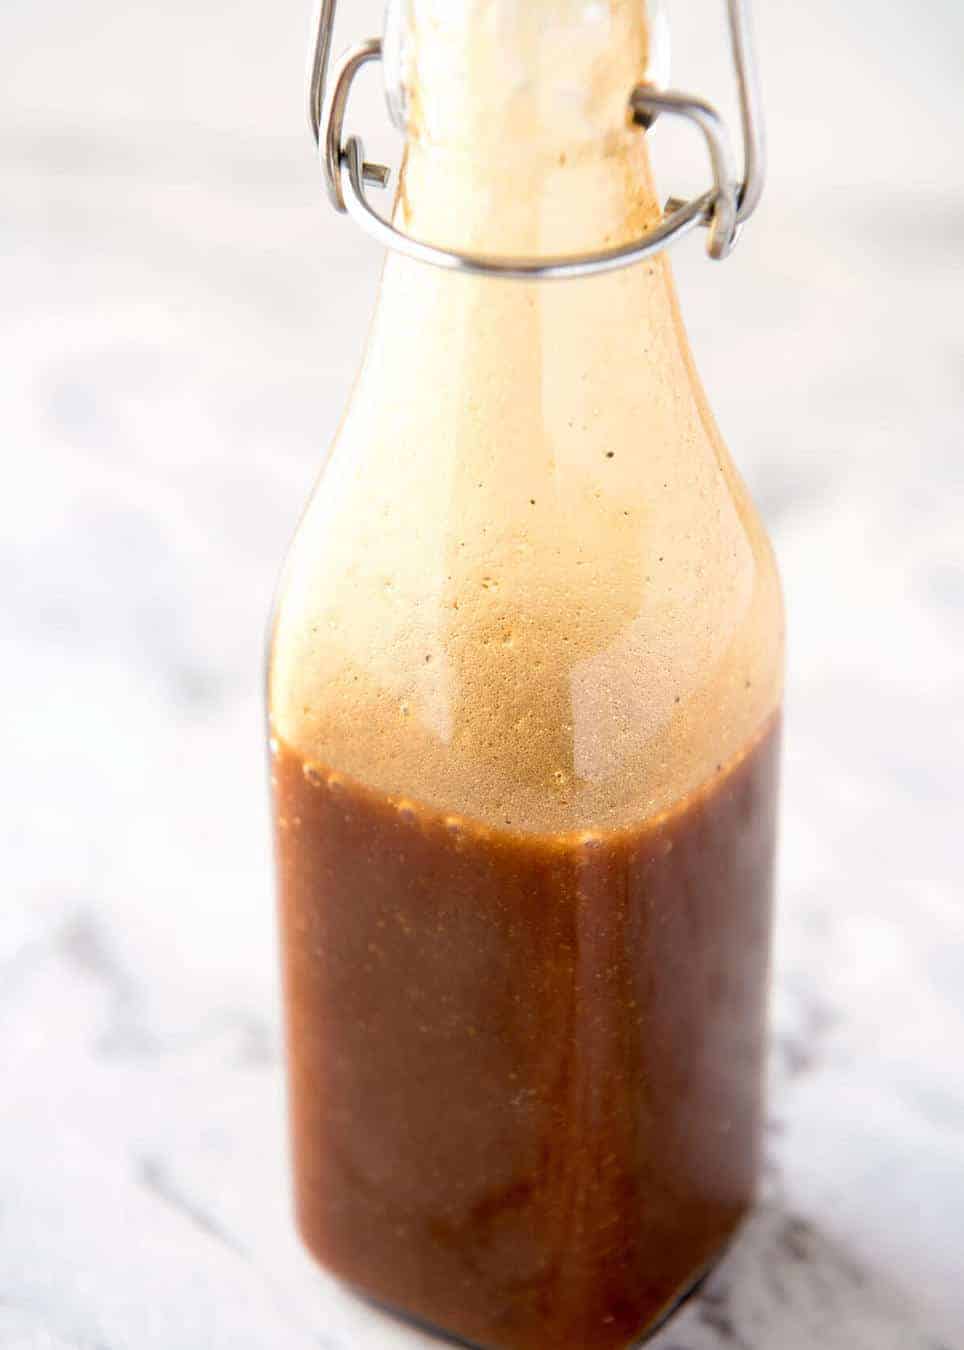 Balsamic Vinegar Dressing - A classic everyone should know: 1 part vinegar, 3 parts oil. Keep for 3 weeks+. recipetineats.com